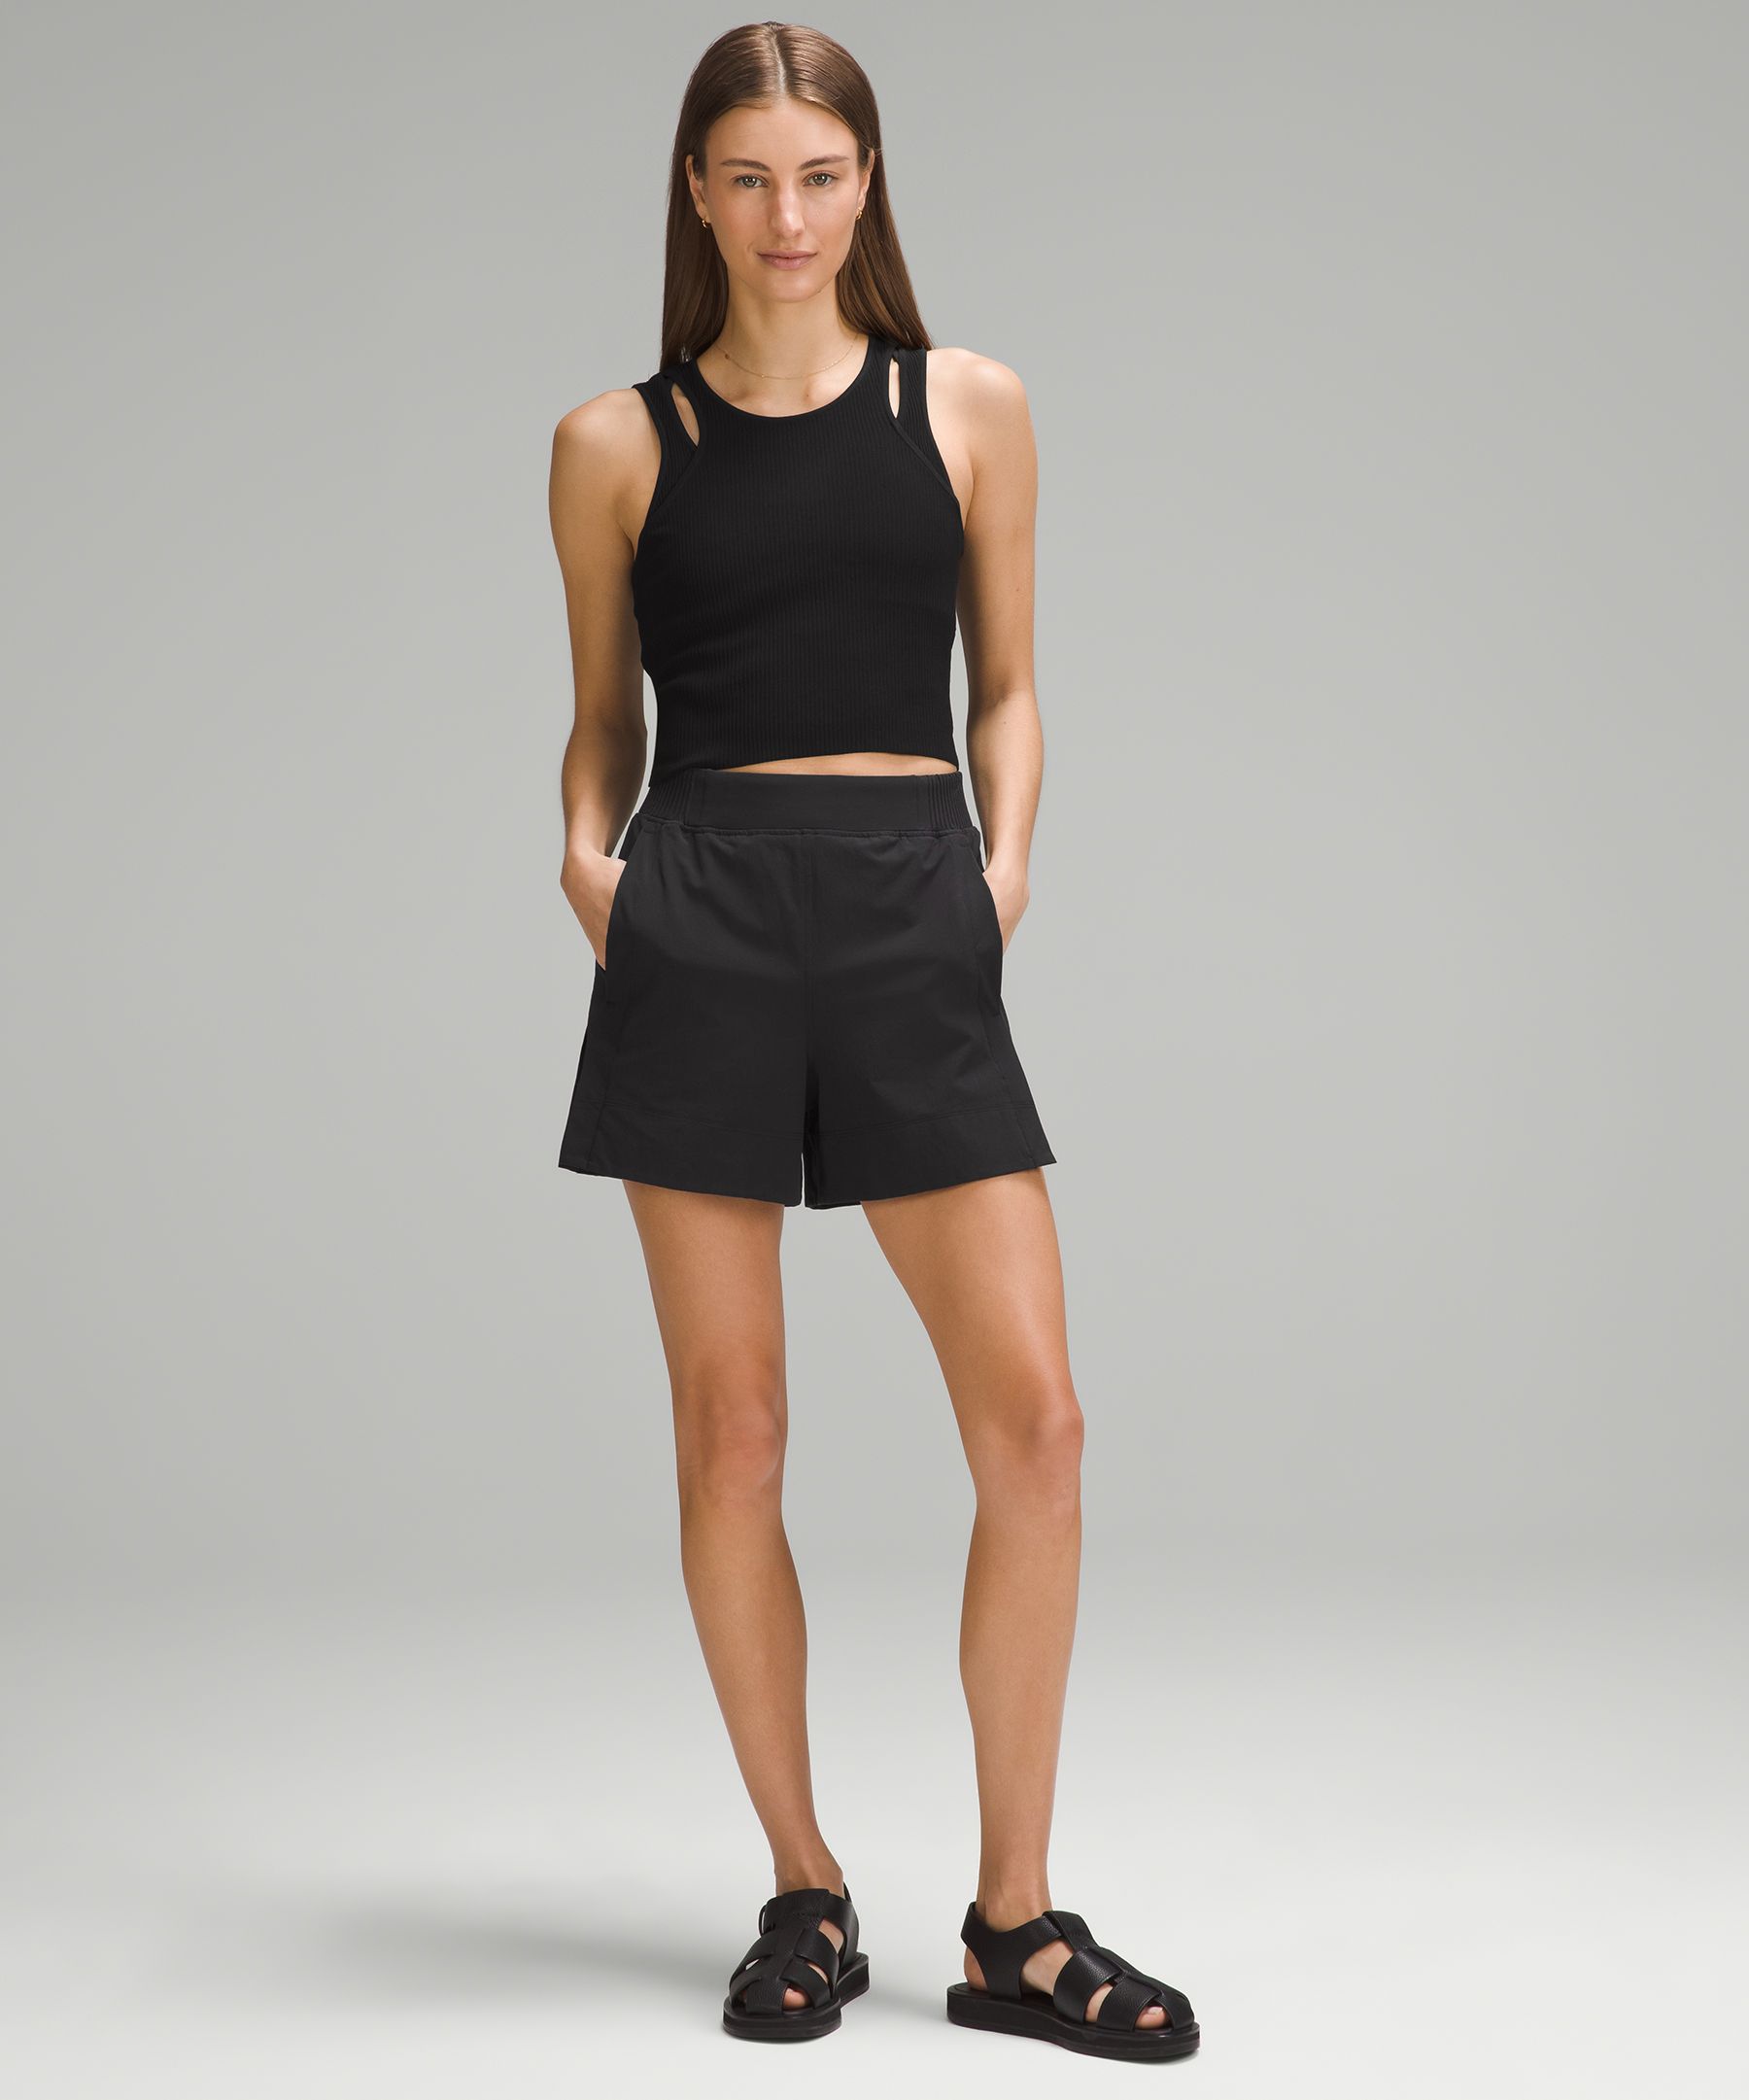 IN-STORE TRY-ON: HOLD TIGHT CROPPED T-SHIRT IN BLACK+ STRETCH WOVEN RELAXED  FIT HR SHORT 4” IN BONE 🤍 : r/lululemon